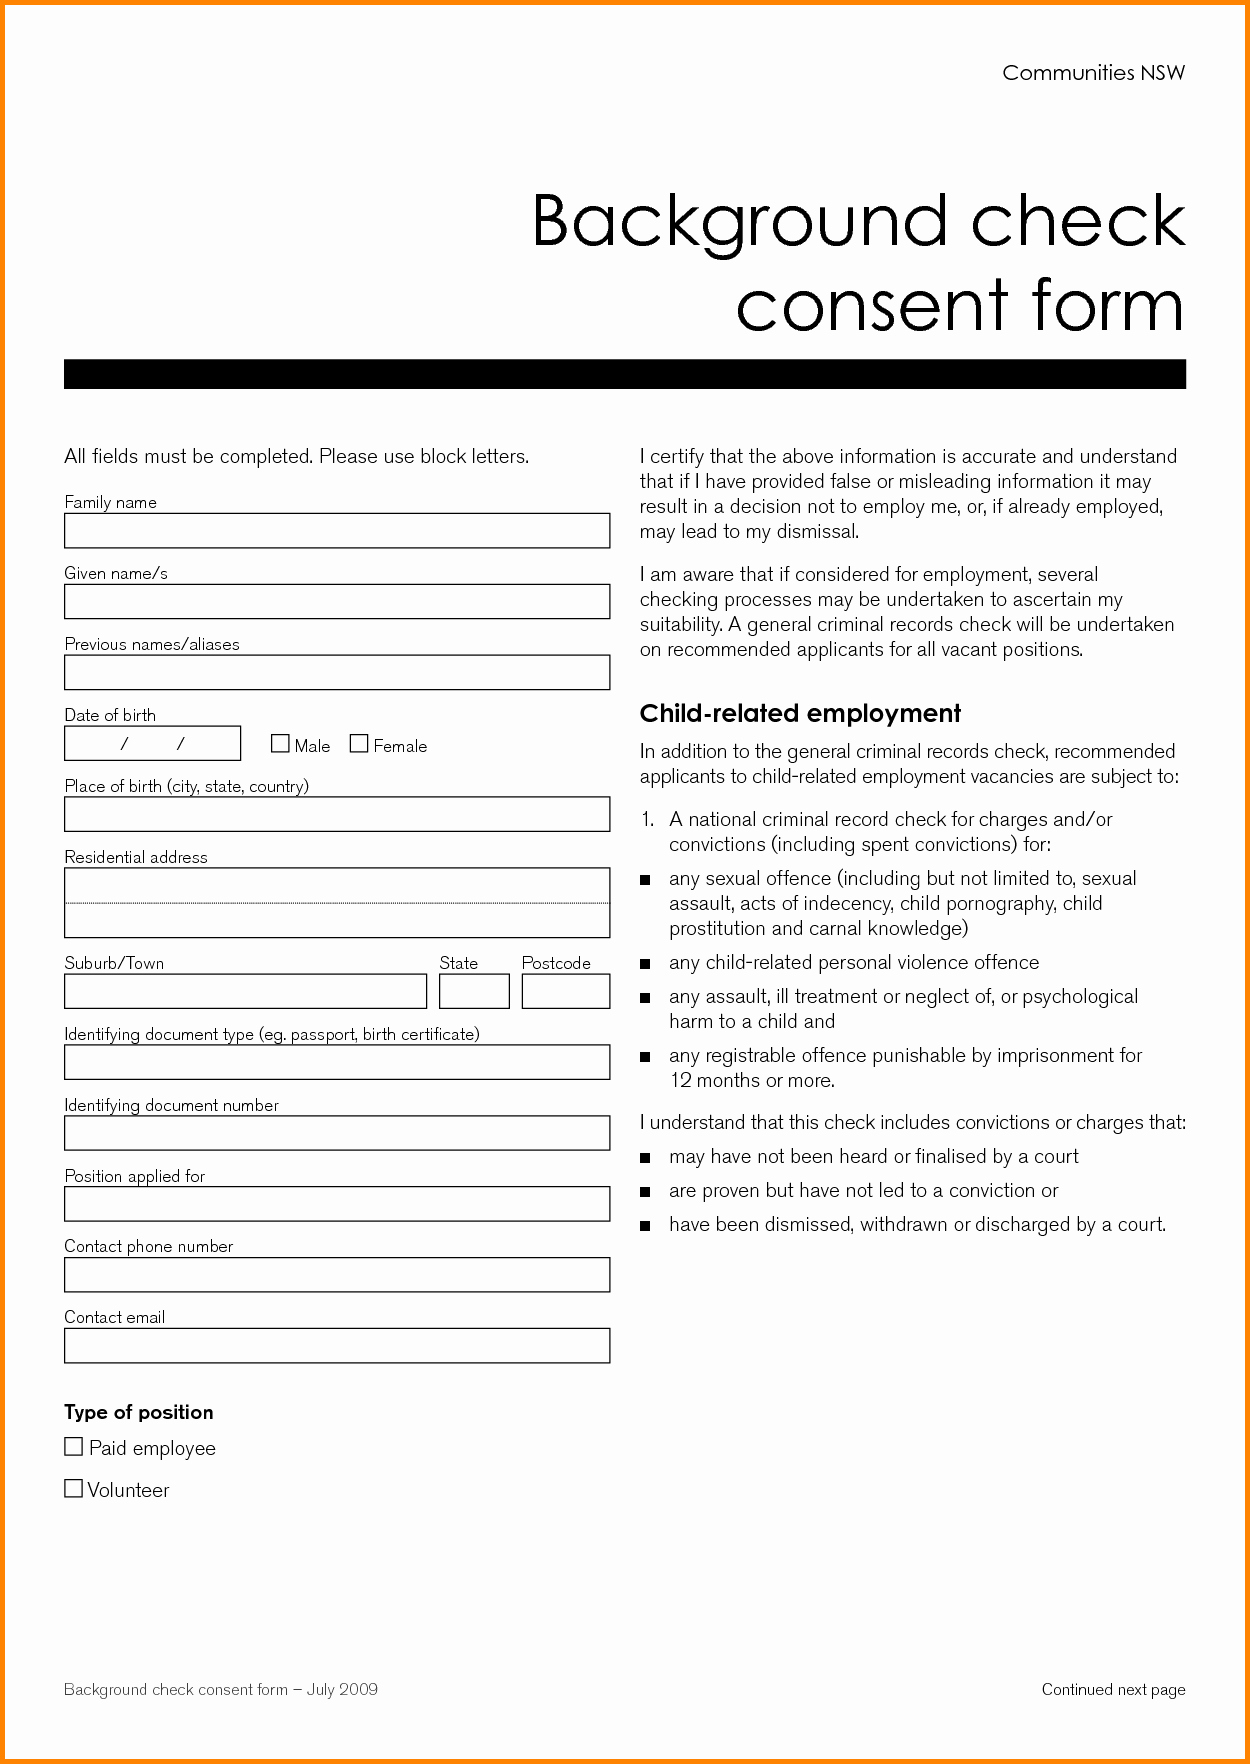 Background Check form Template Free Beautiful Background Check form Template Free 7 Background Check All